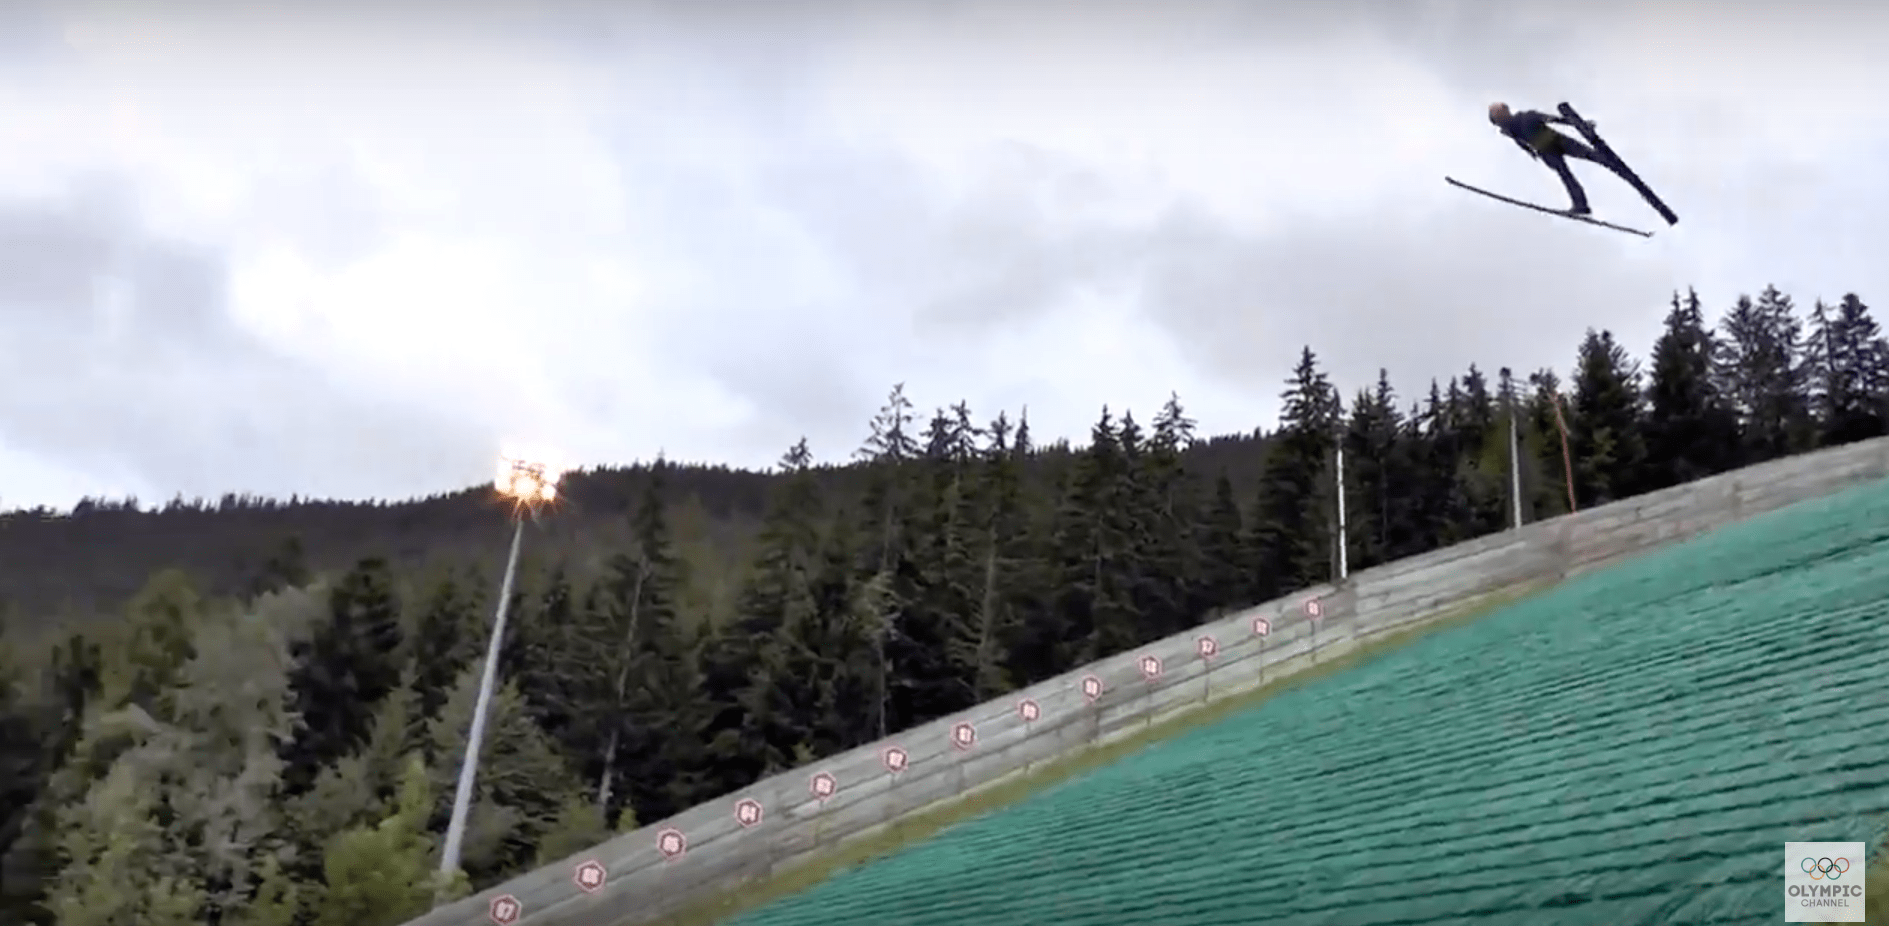 ski jumping, jumpers, year round, technology, france, courchevel, winter olympics